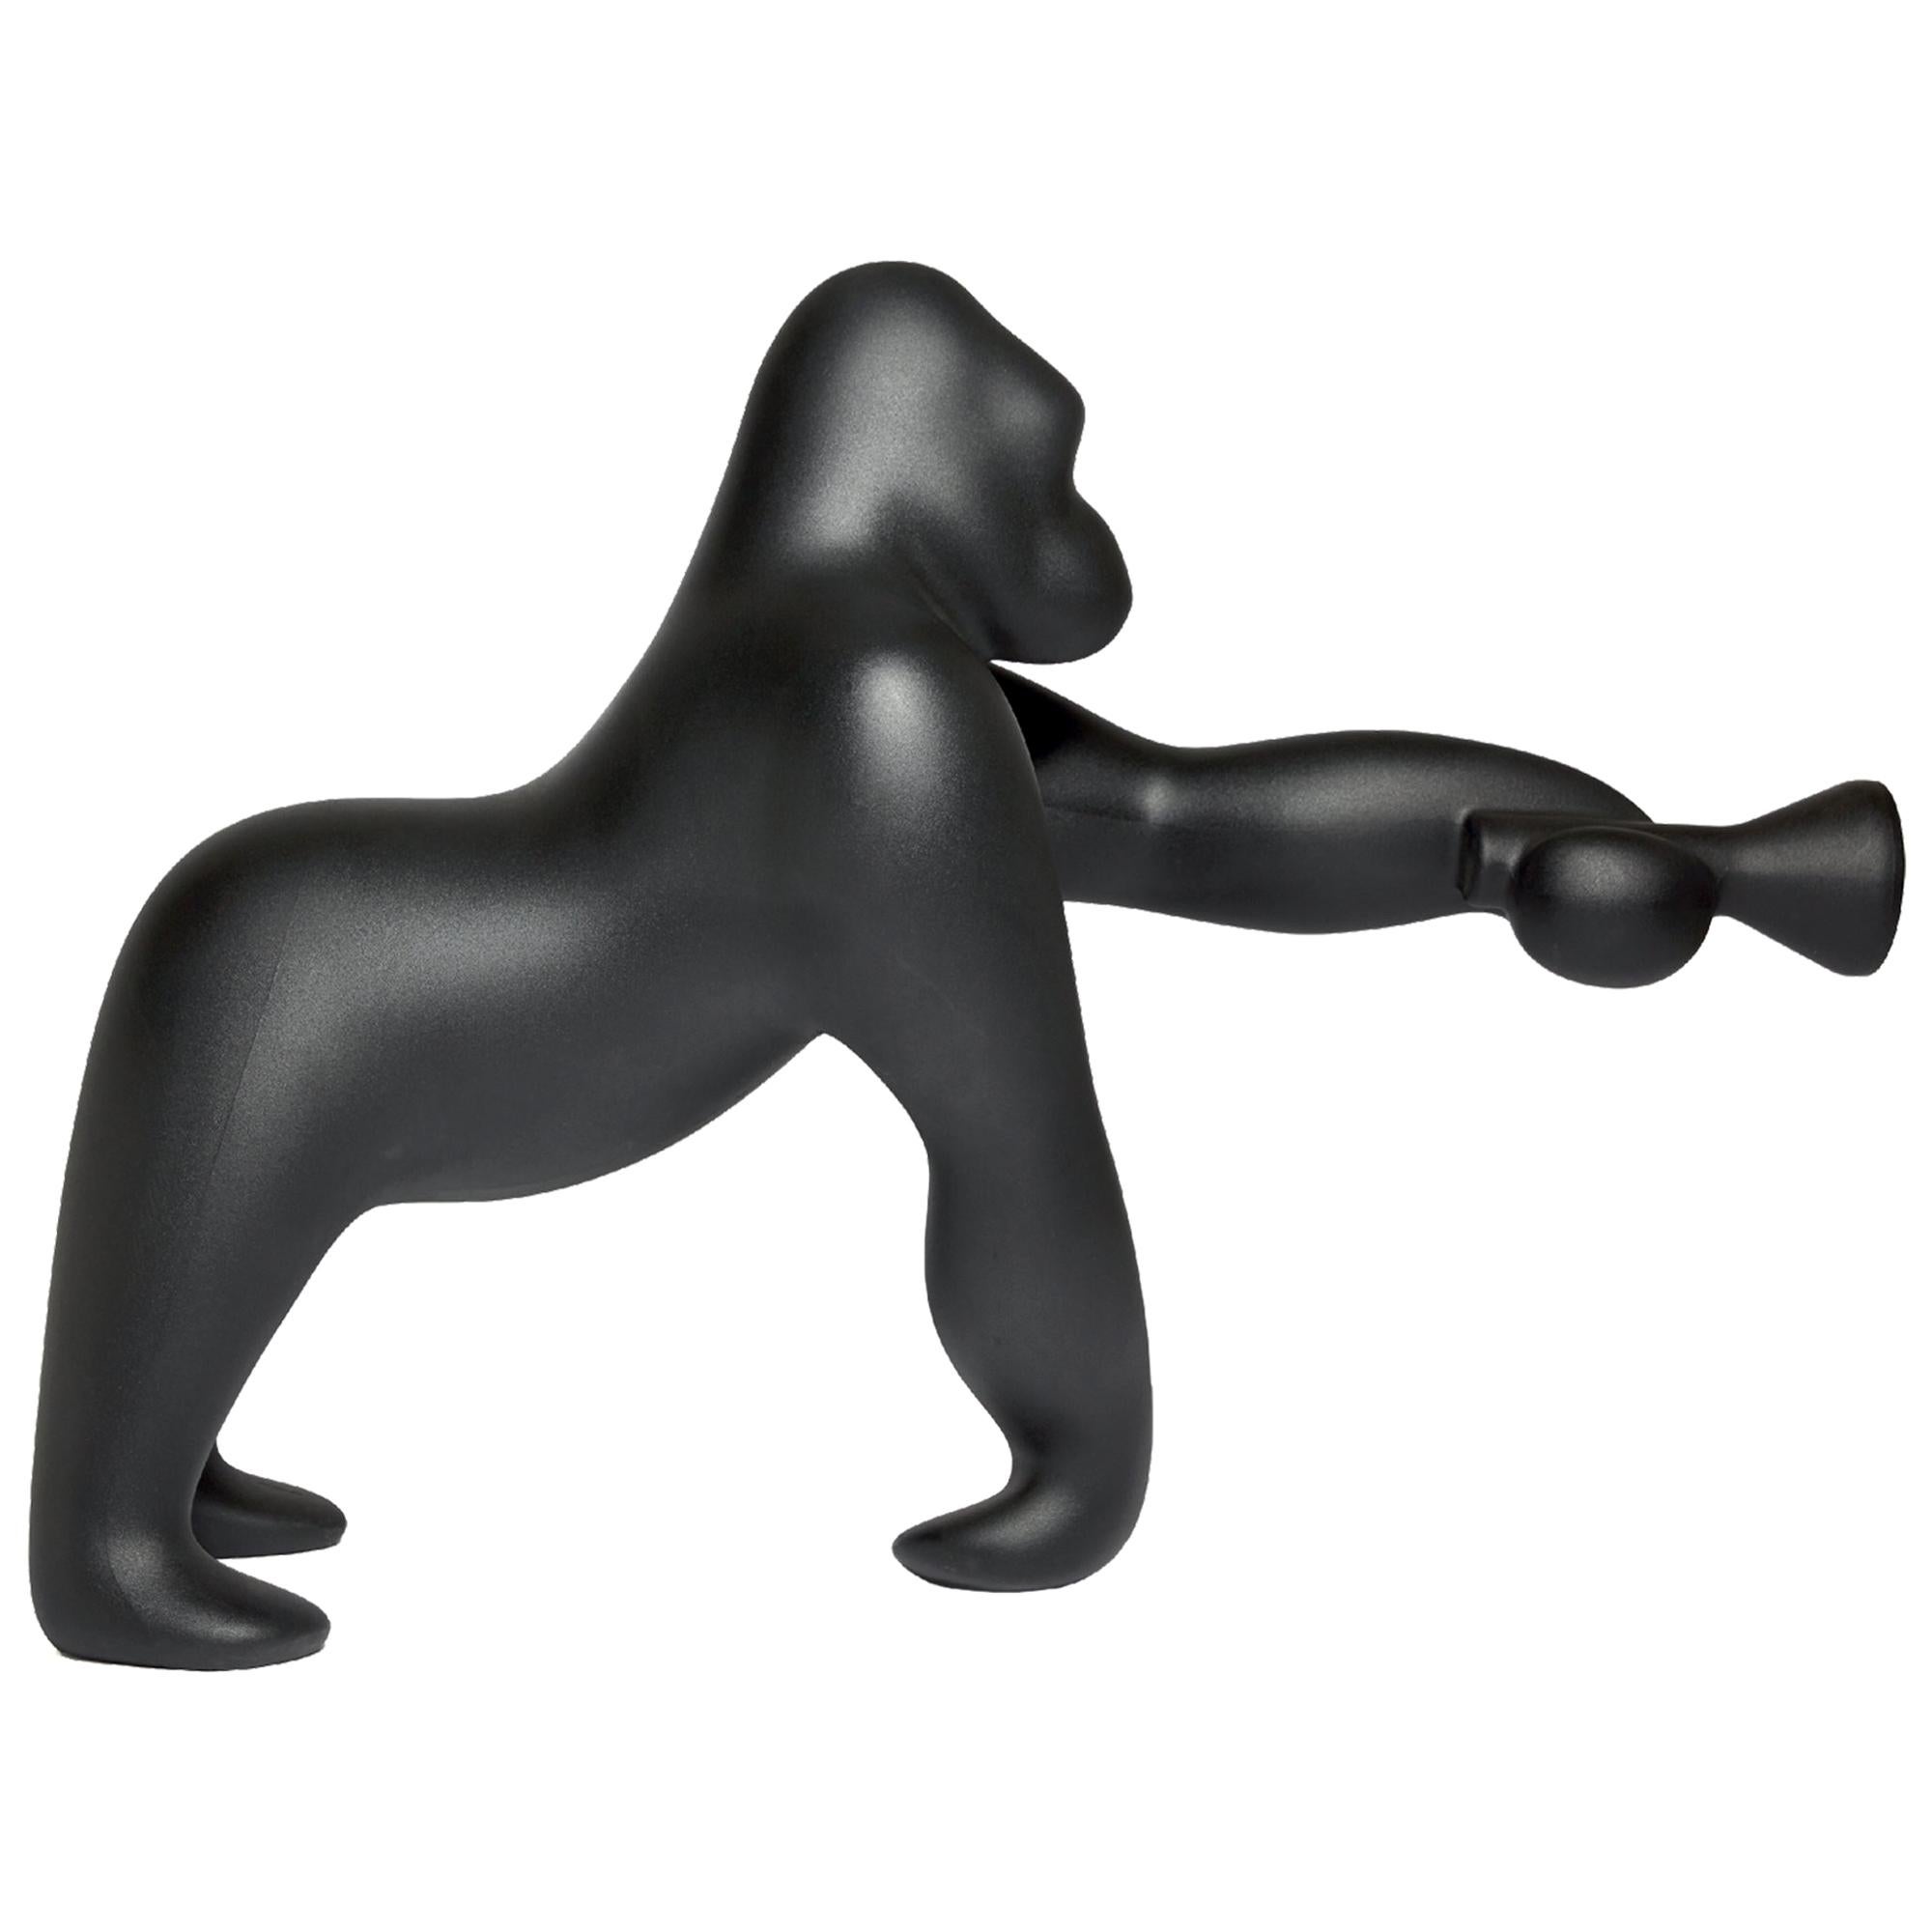 Kong Black Gorilla Floor Lamp, Designed by Stefano Giovannoni, Made in Italy For Sale